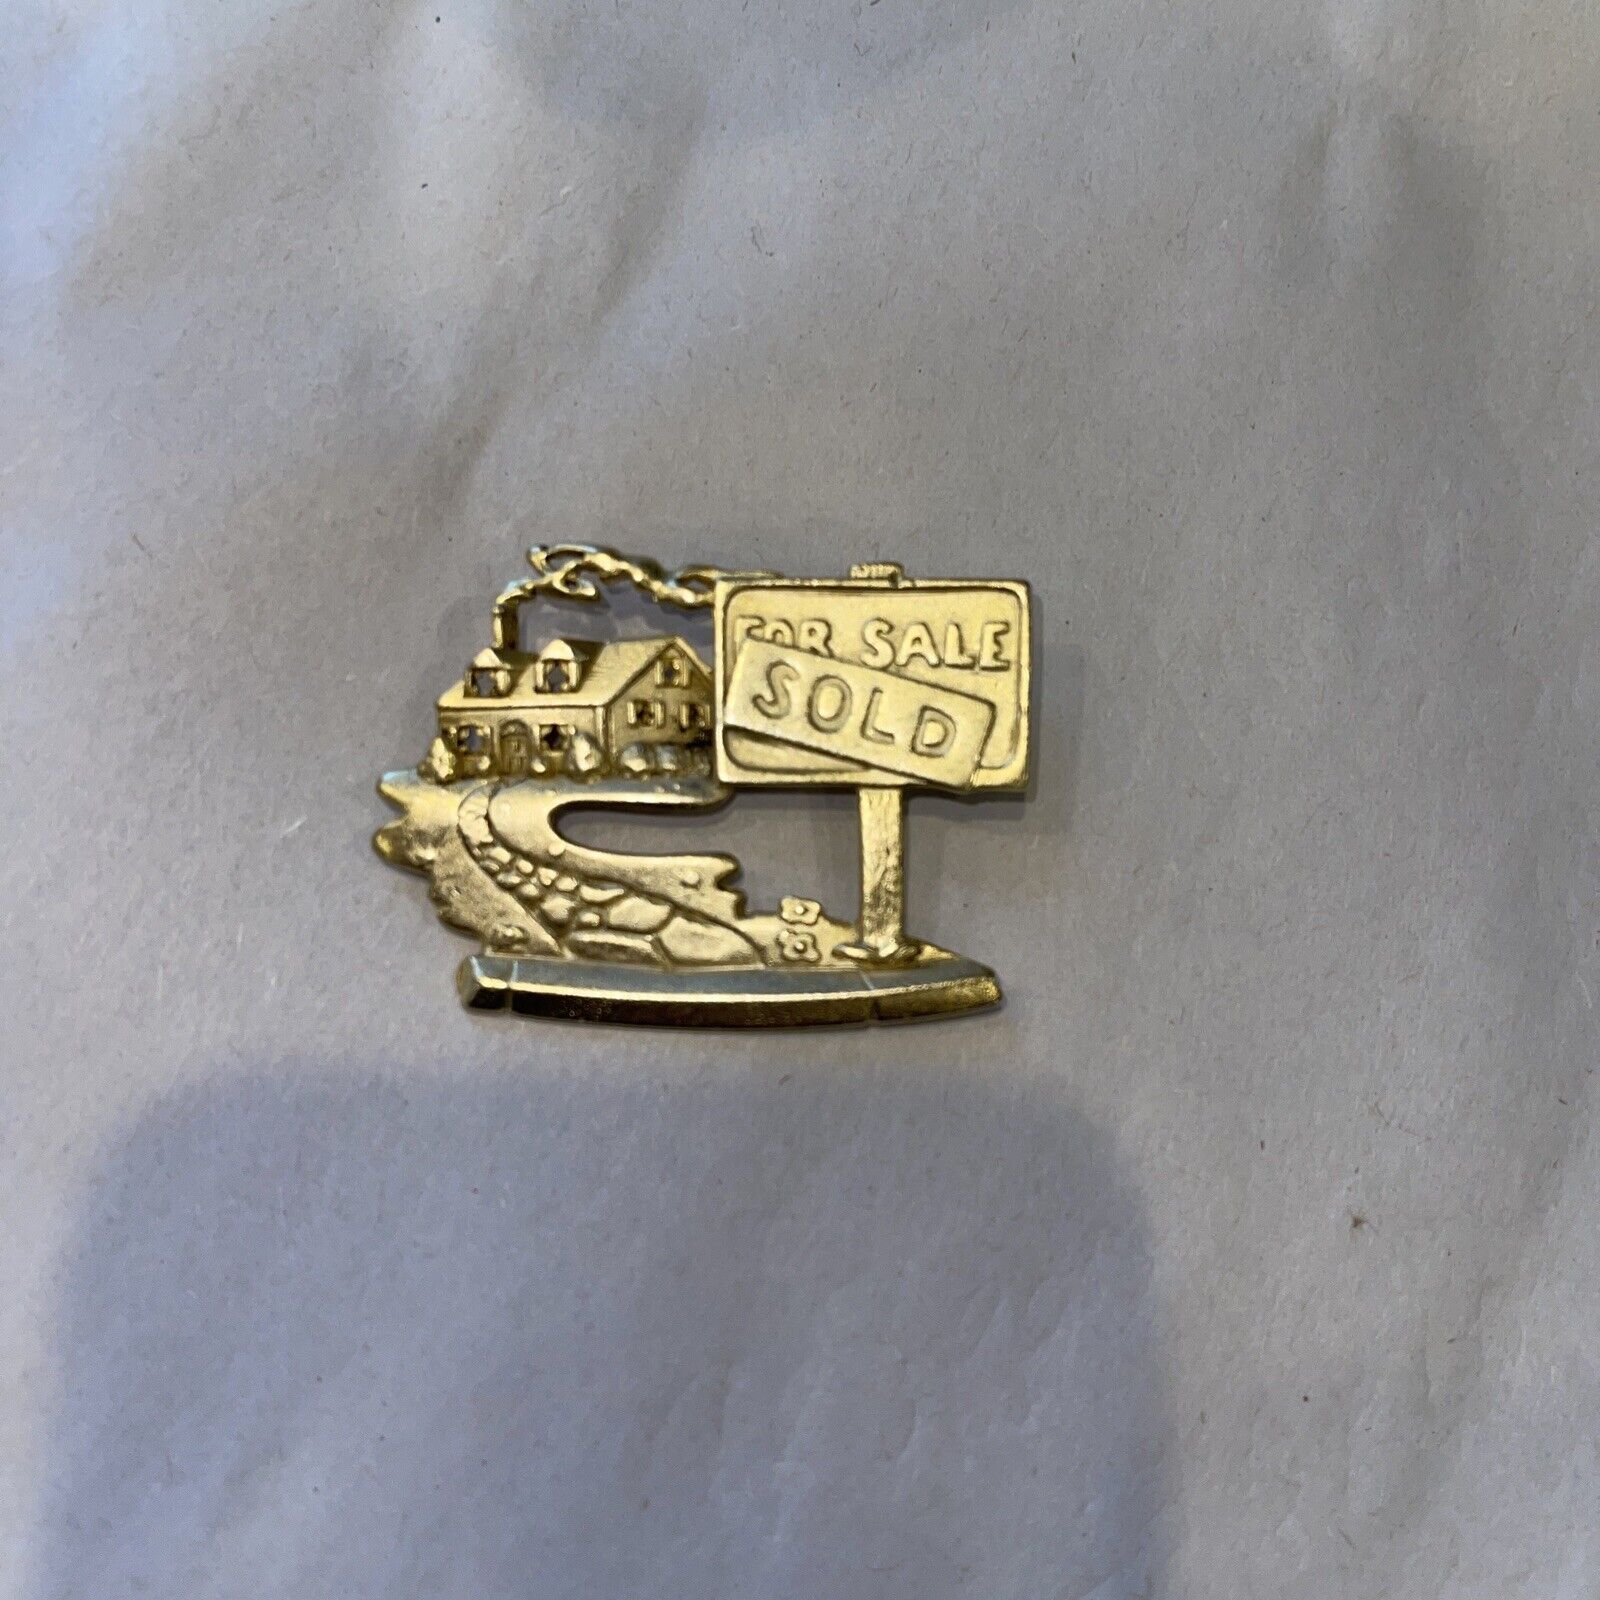 Vintage AJC SOLD House For Sale Real Estate Sign Realtor Gold Tone Lapel Pin